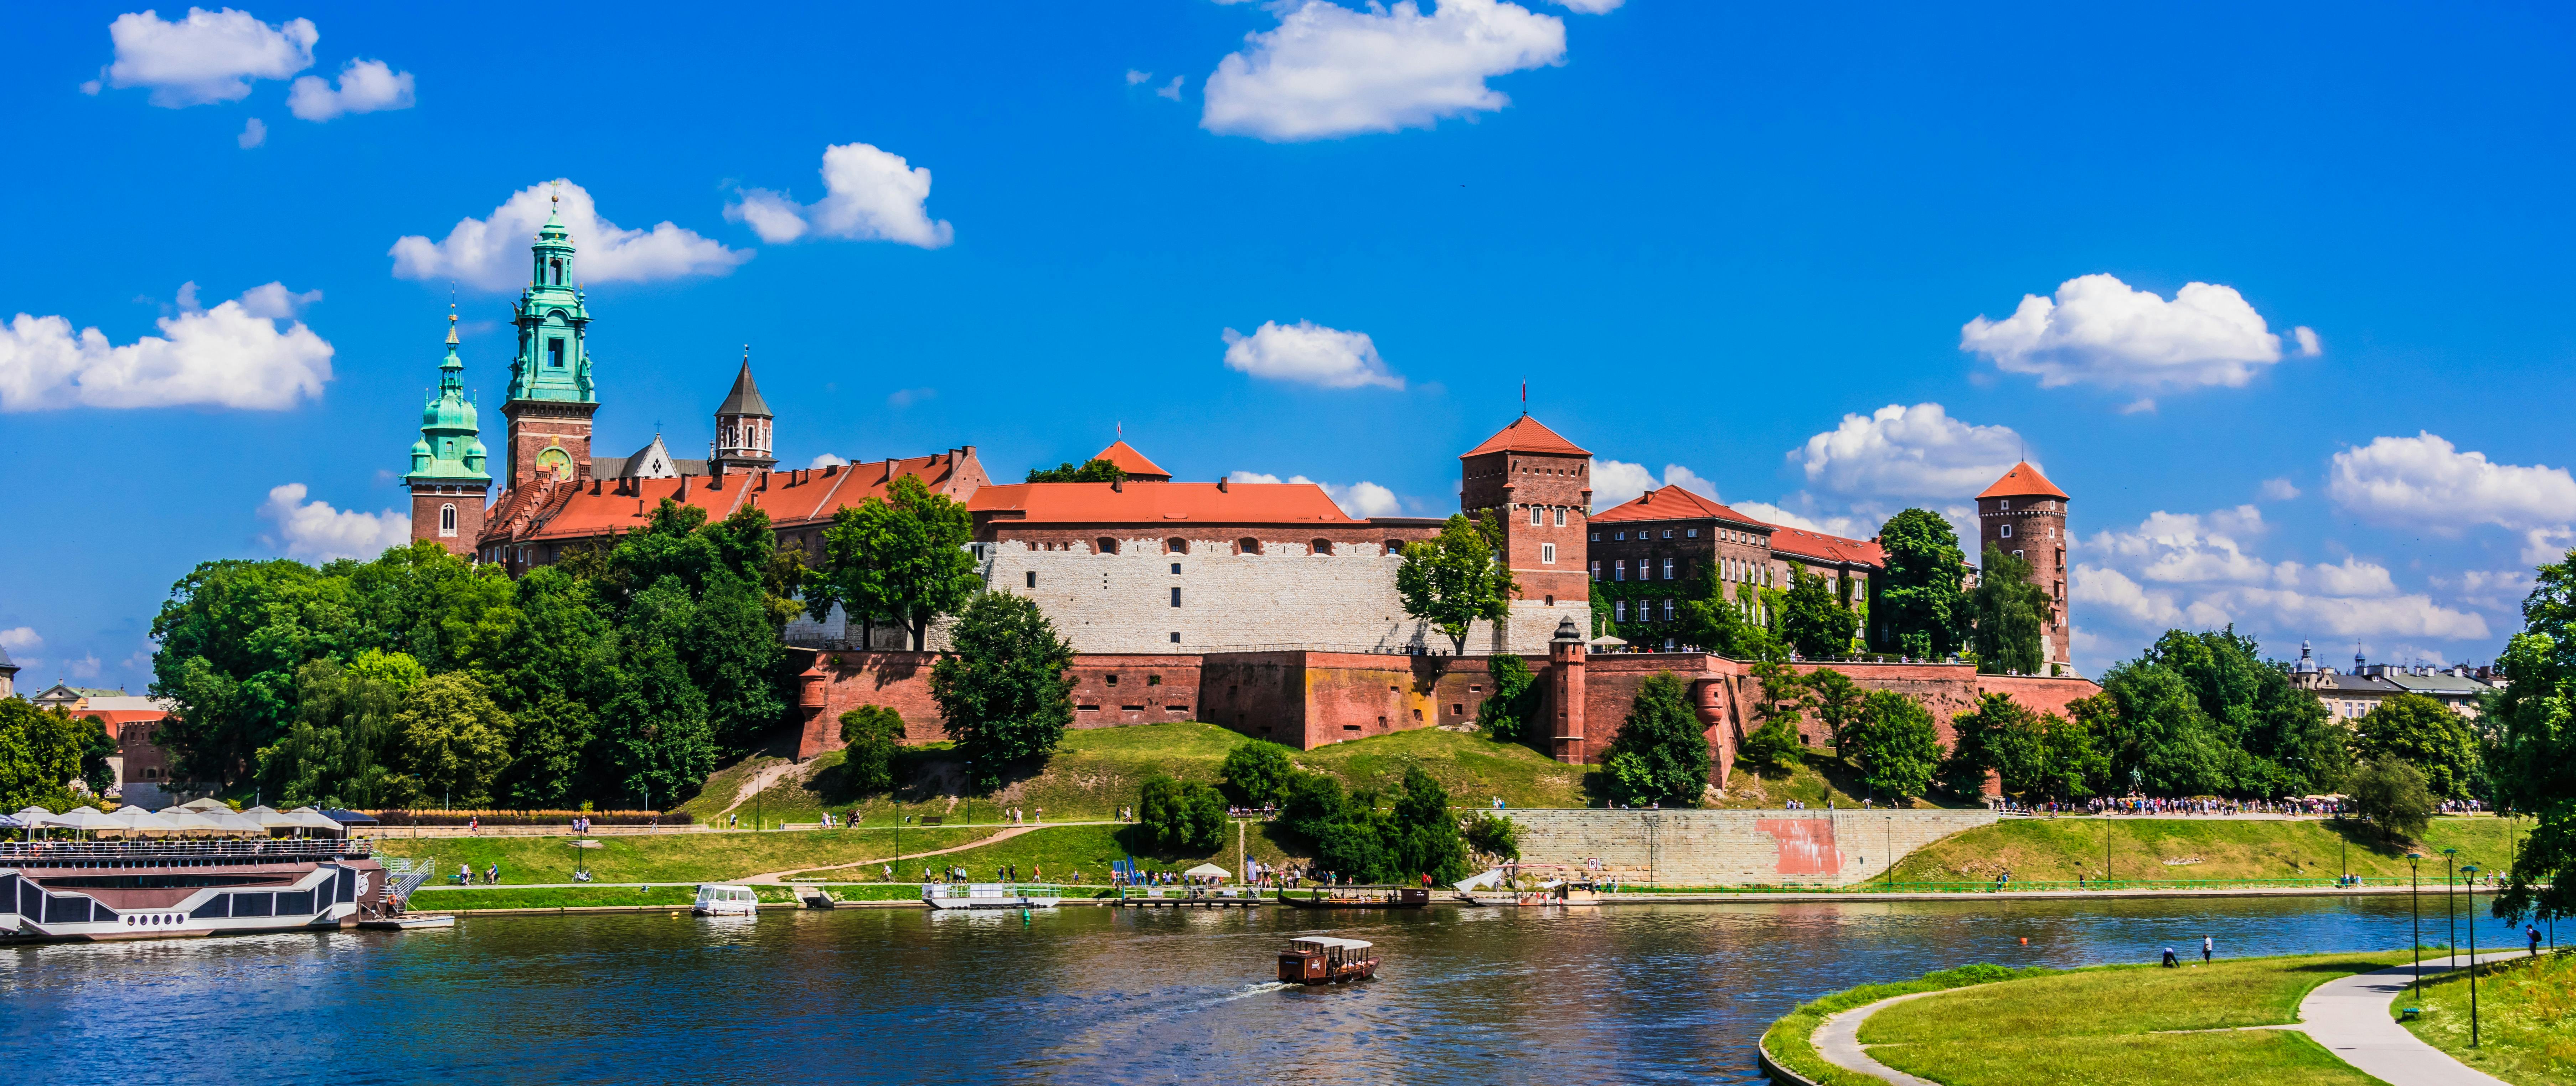 Wawel Hill guided tour